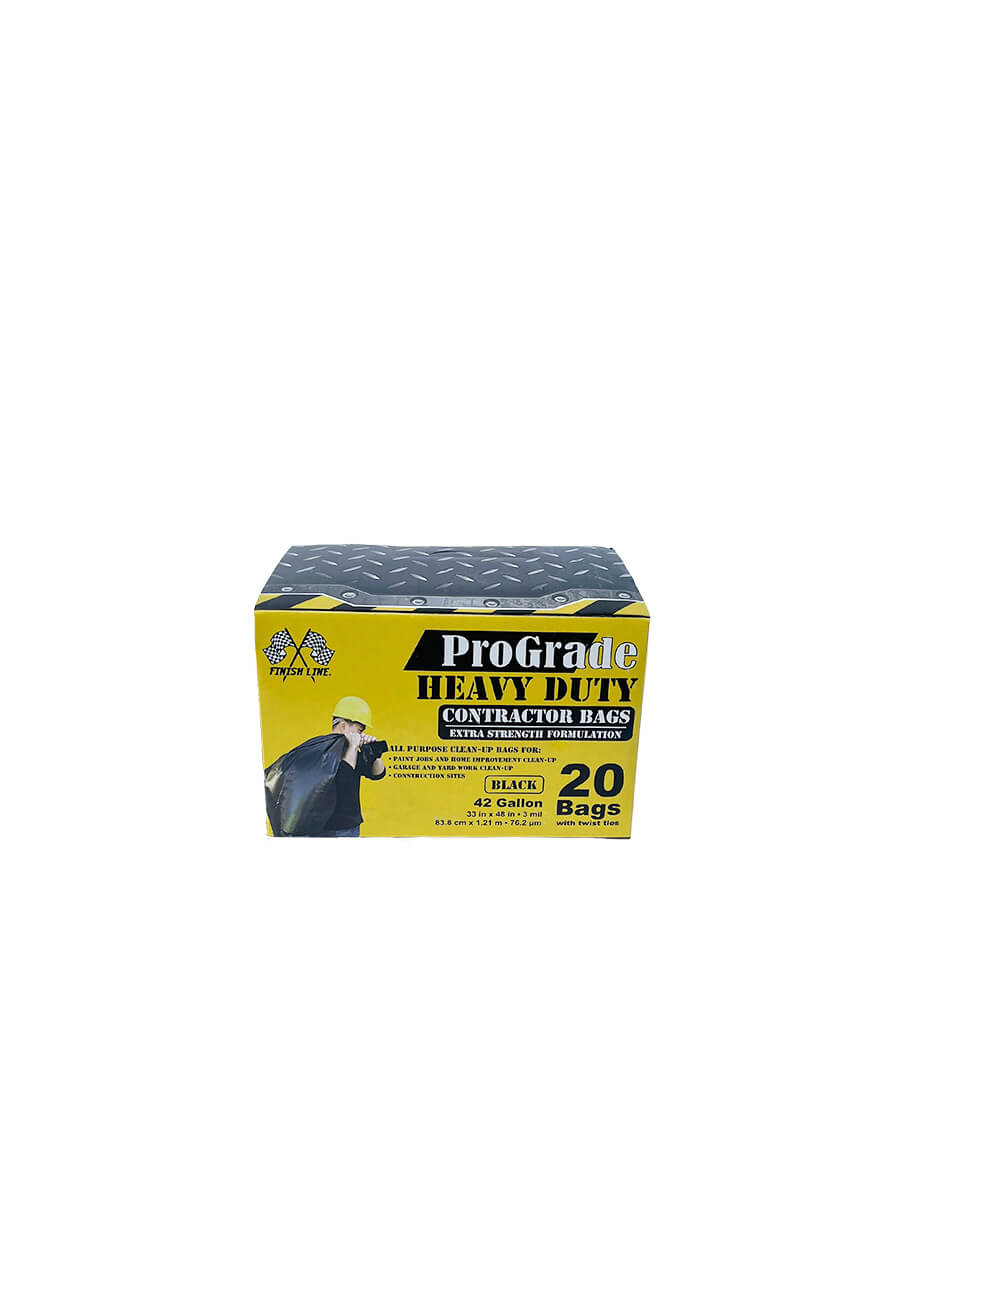 PROGRADE HD 3 MIL CONTRACTOR BAGS 42 GAL 20 PC - Coastal Construction  Products